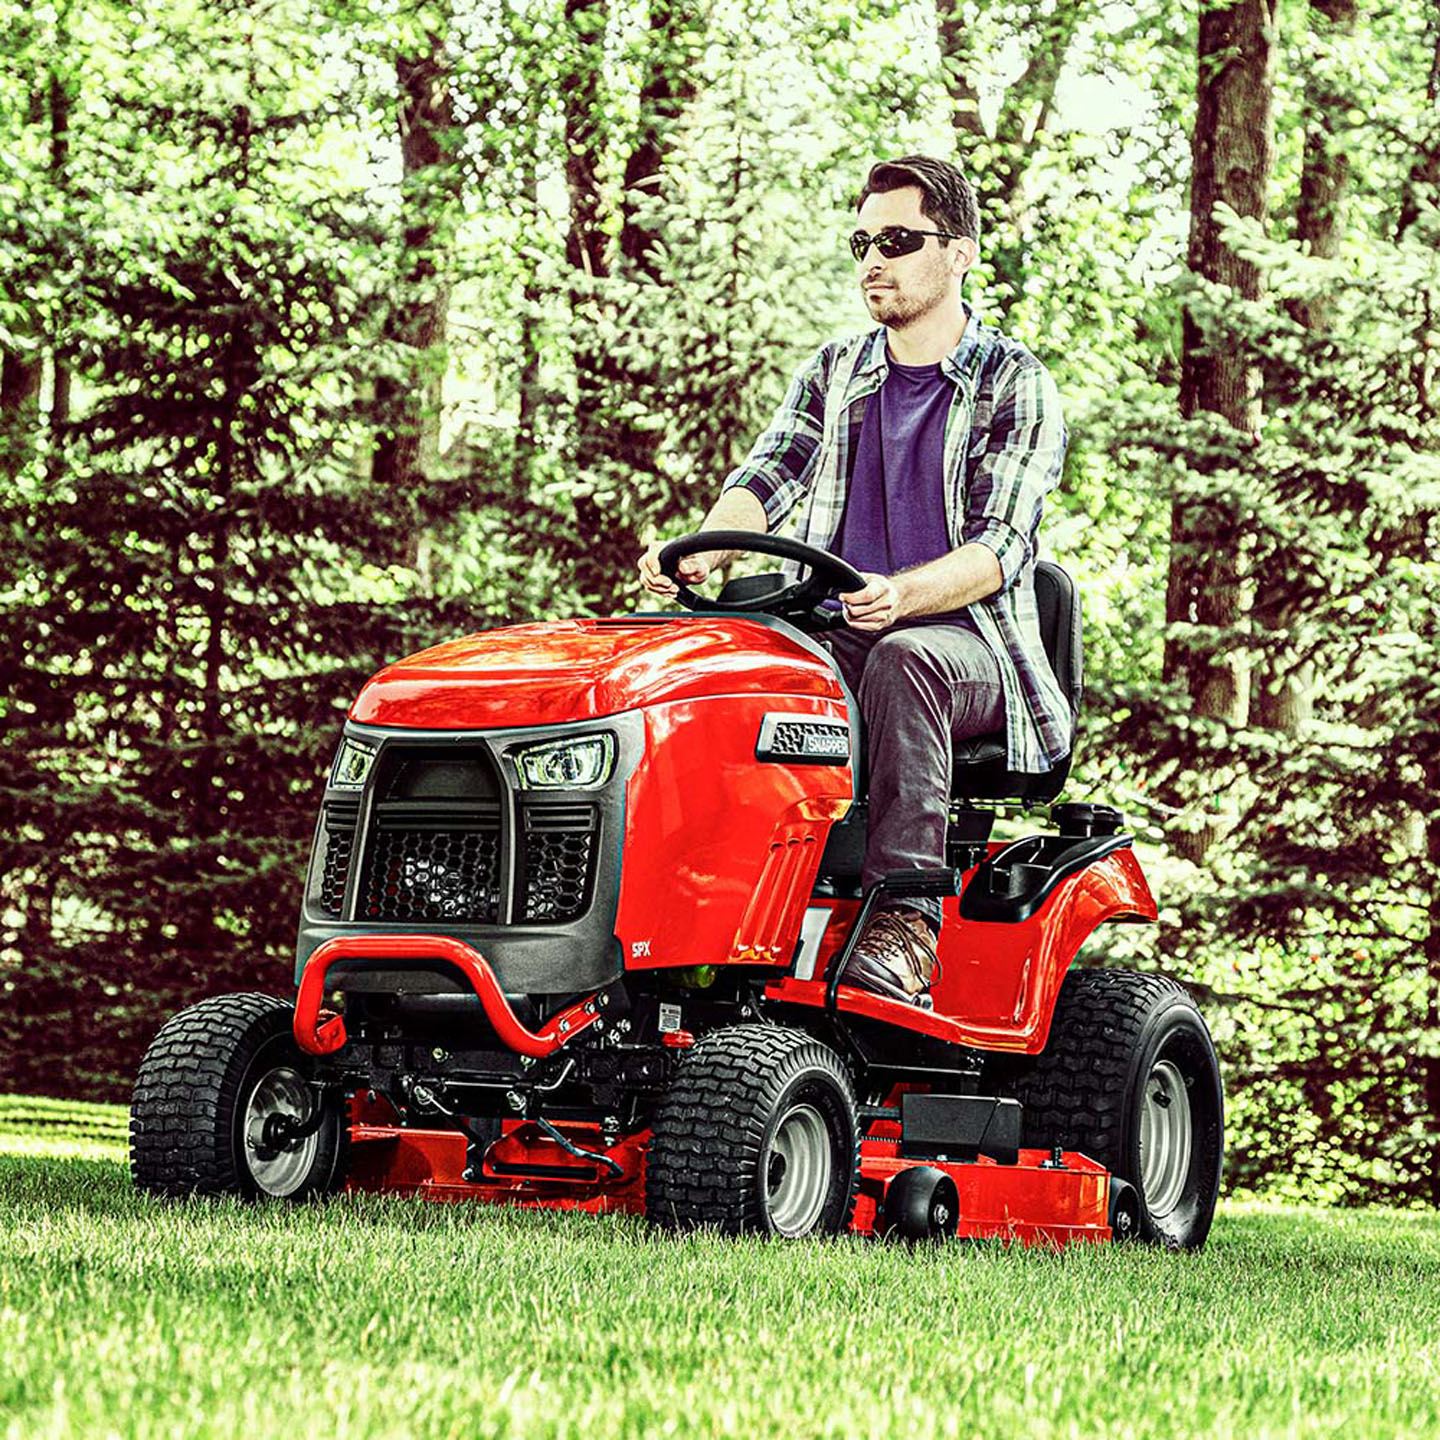 2022 Snapper SPX 42 in. Briggs & Stratton PXi Series 25 hp in Rice Lake, Wisconsin - Photo 5